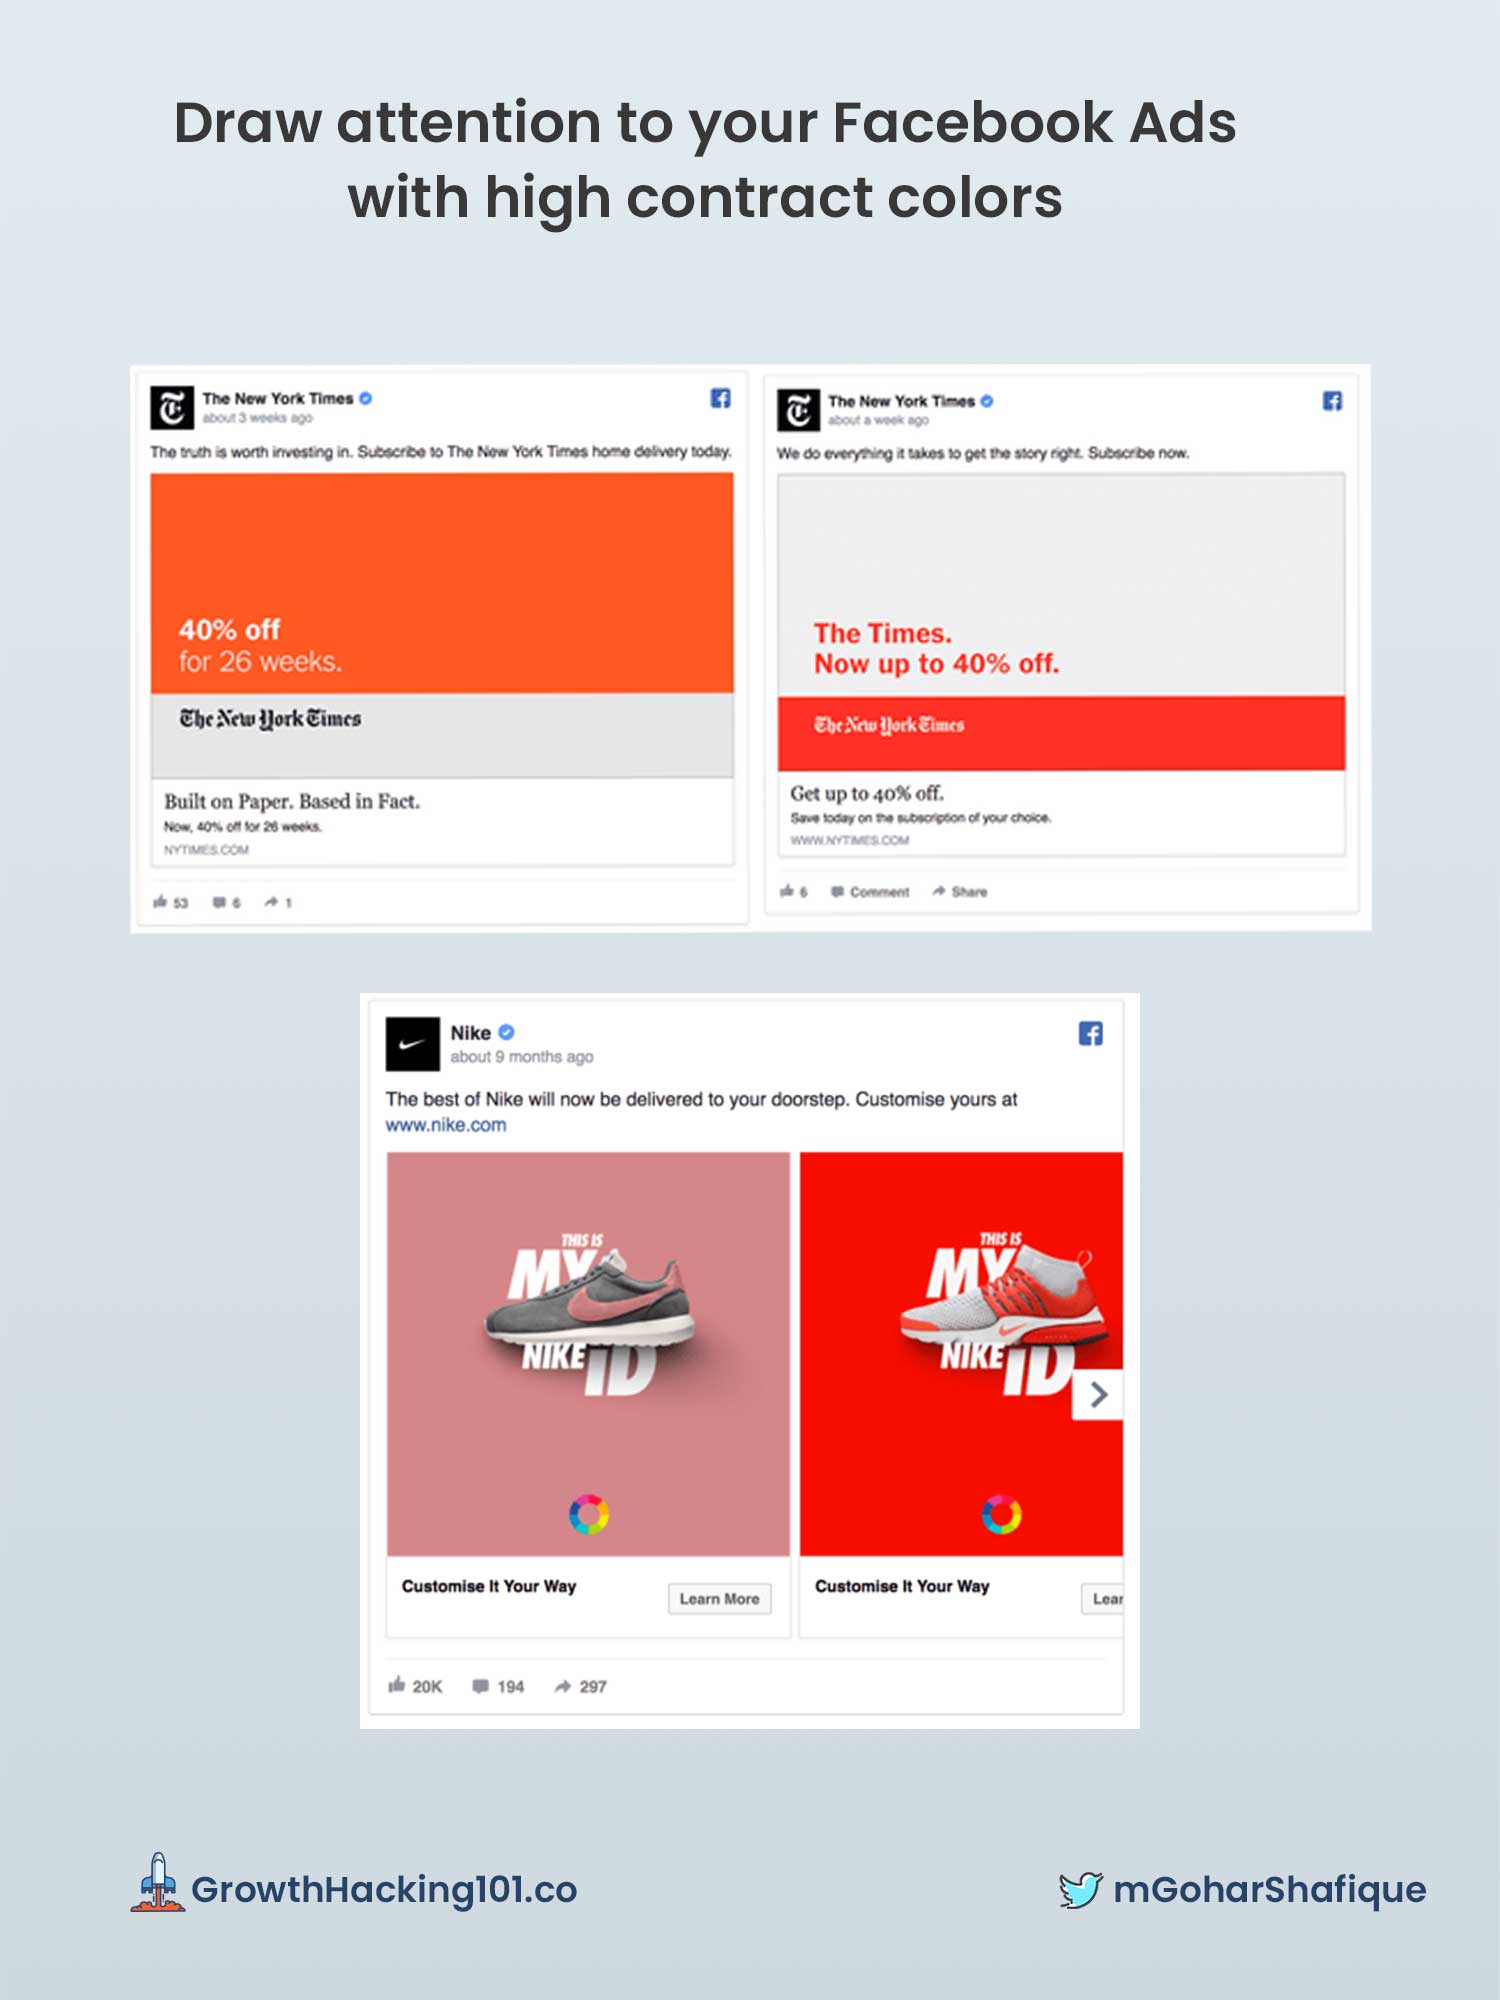 Top 8 studies: 40% more leads from these Facebook Ad design hacks